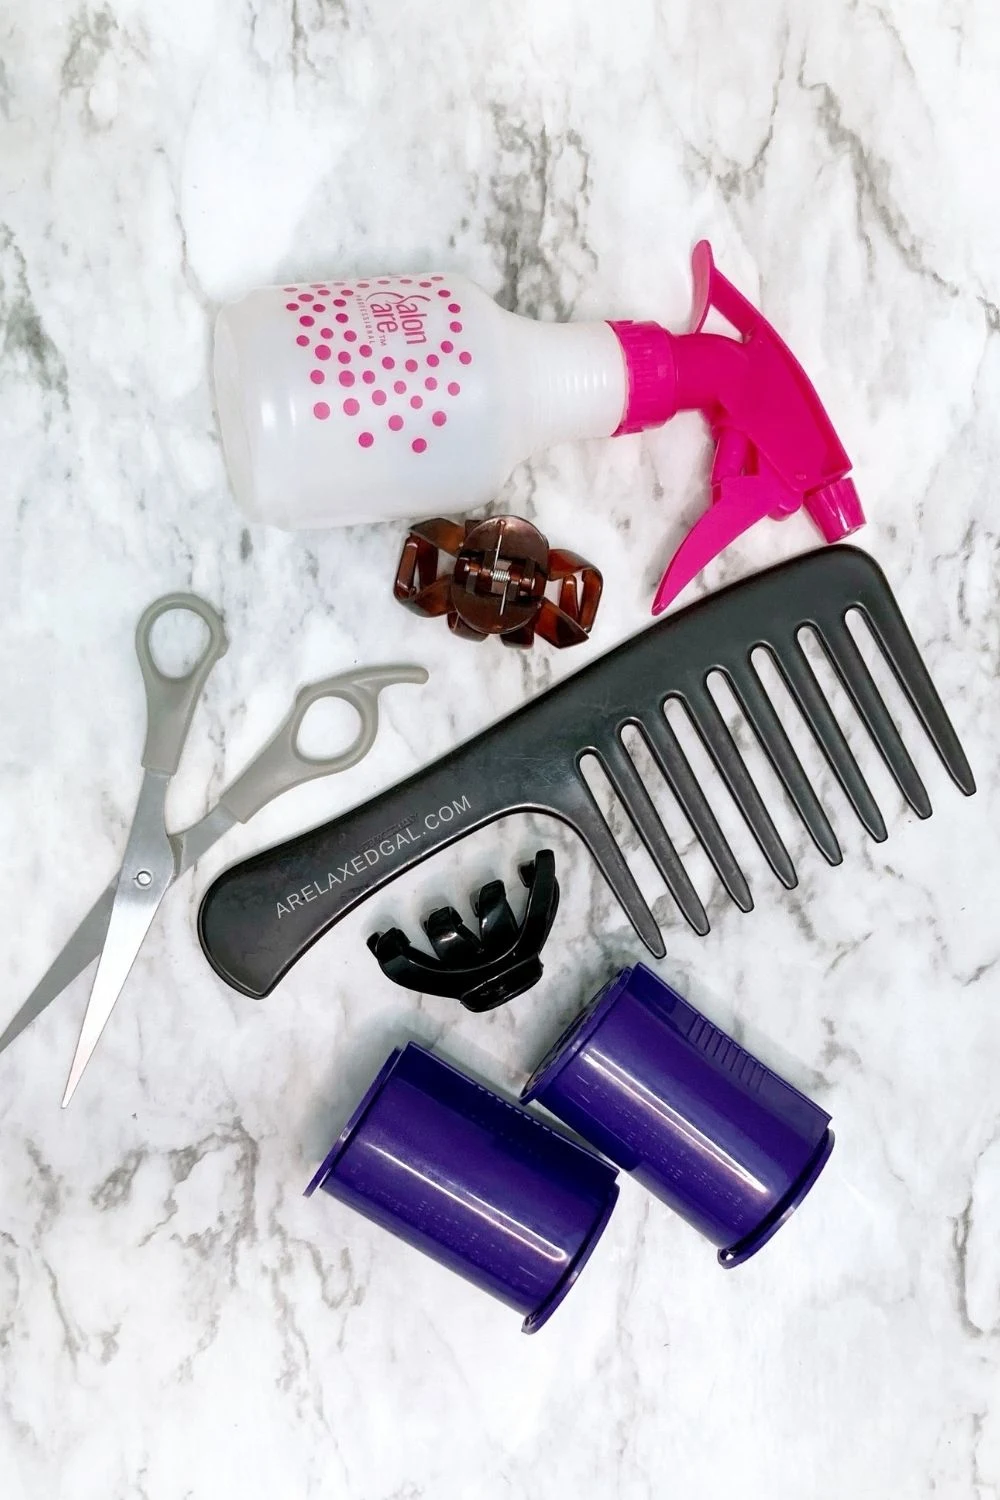 hair tools for relaxed hair lying on a pretty granite countertop.